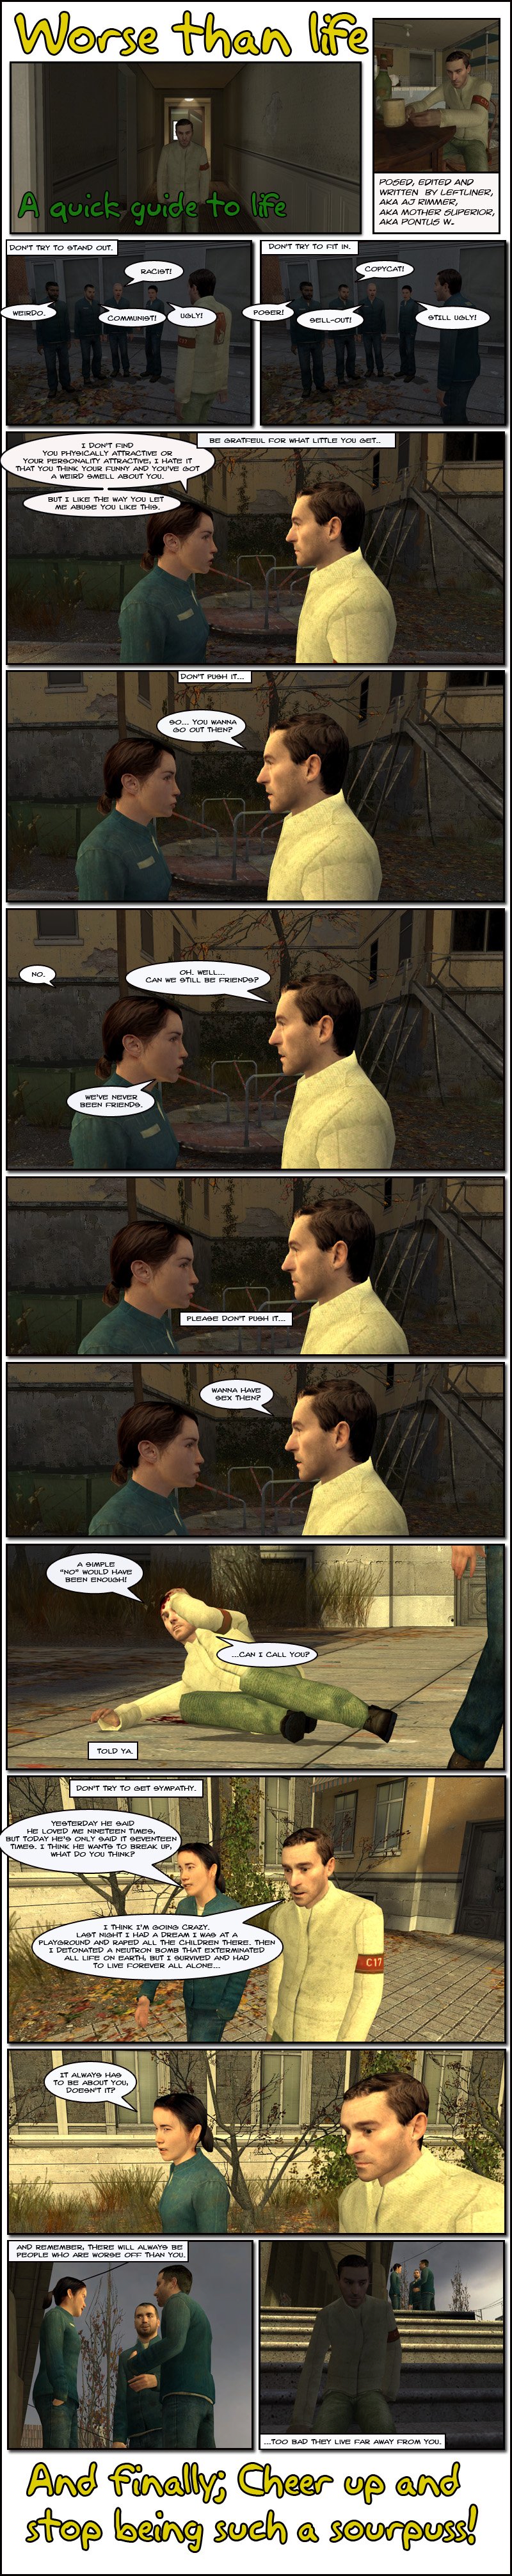 The narrator gives a quick guide to life, beginning with don't try to stand out, as we see AJ Rimmer in his Half-Life 2 beta citizen clothes being harassed by a group of citizens in blue Half-Life 2 citizen clothes. The narrator then says don't try to fit in, as we see Rimmer in the same blue clothes, being once again harassed by the same crowd. The narrator says be grateful for what little you get, as we see a girl telling Rimmer that she doesn't find him physically attractive or his personality attractive, se hates that he thinks he is funny and he has a weird smell about him, but she likes the way he lets her abuse him like this. The narrator then adds don't push it as Rimmer asks if she wants to go out. She tells him no and he asks if they can still be friends, to which she retorts they were never friends. Rimmer pauses as the narrator begs him to please not push it, then Rimmer asks if she wants to have sex. Cut to Rimmer on the ground, bleeding from the head, telling her a simple no would have sufficed, then he asks if he can call her as the narrator tells him told ya. The narrator further suggests not to try to get sympathy as a girl rants to Rimmer that her boyfriend only told her he loved her seventeen times today, so she thinks he wants to break up. She asks Rimmer what he thinks and he tells her he thinks he's going crazy, that last night he had a dream he was at a playground and raped all the children there, then detonated a neutron bomb that exterminated all life on Earth, but he survived and had to live forever all alone. The girl cuts him off, angrily telling him it always has to be about him, doesn't it. Finally, the narrator says to remember that there will always be people who are worse off than you, too bad they live far away from you, and finishes by saying to cheer up and stop being such a sourpuss. The end.